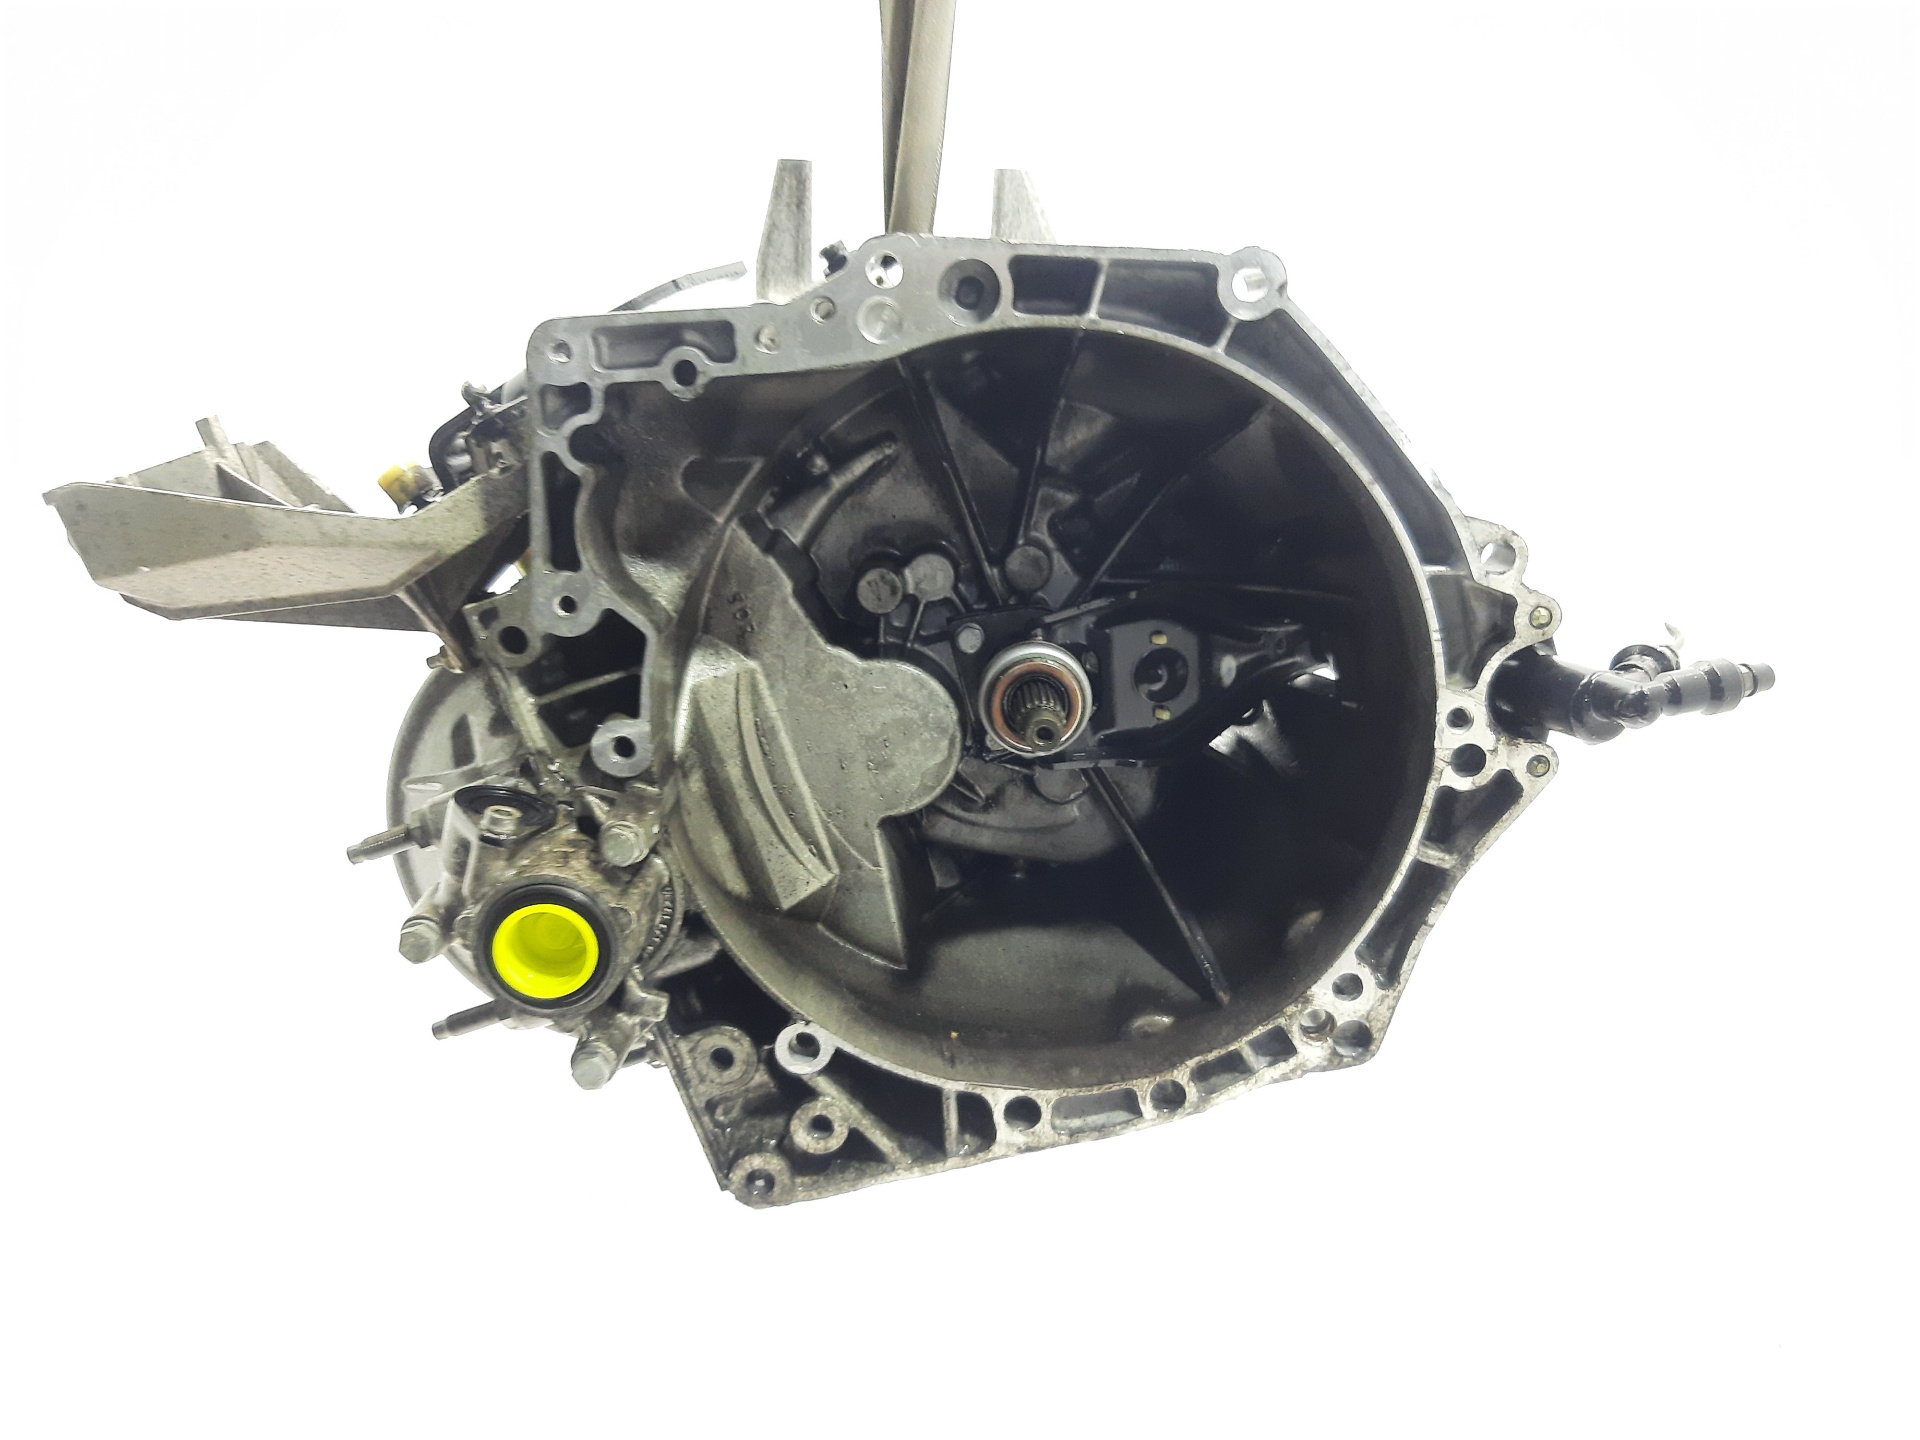 PEUGEOT 407 1 generation (2004-2010) Gearbox 20DM65, S5VELOCIDADES 22639097